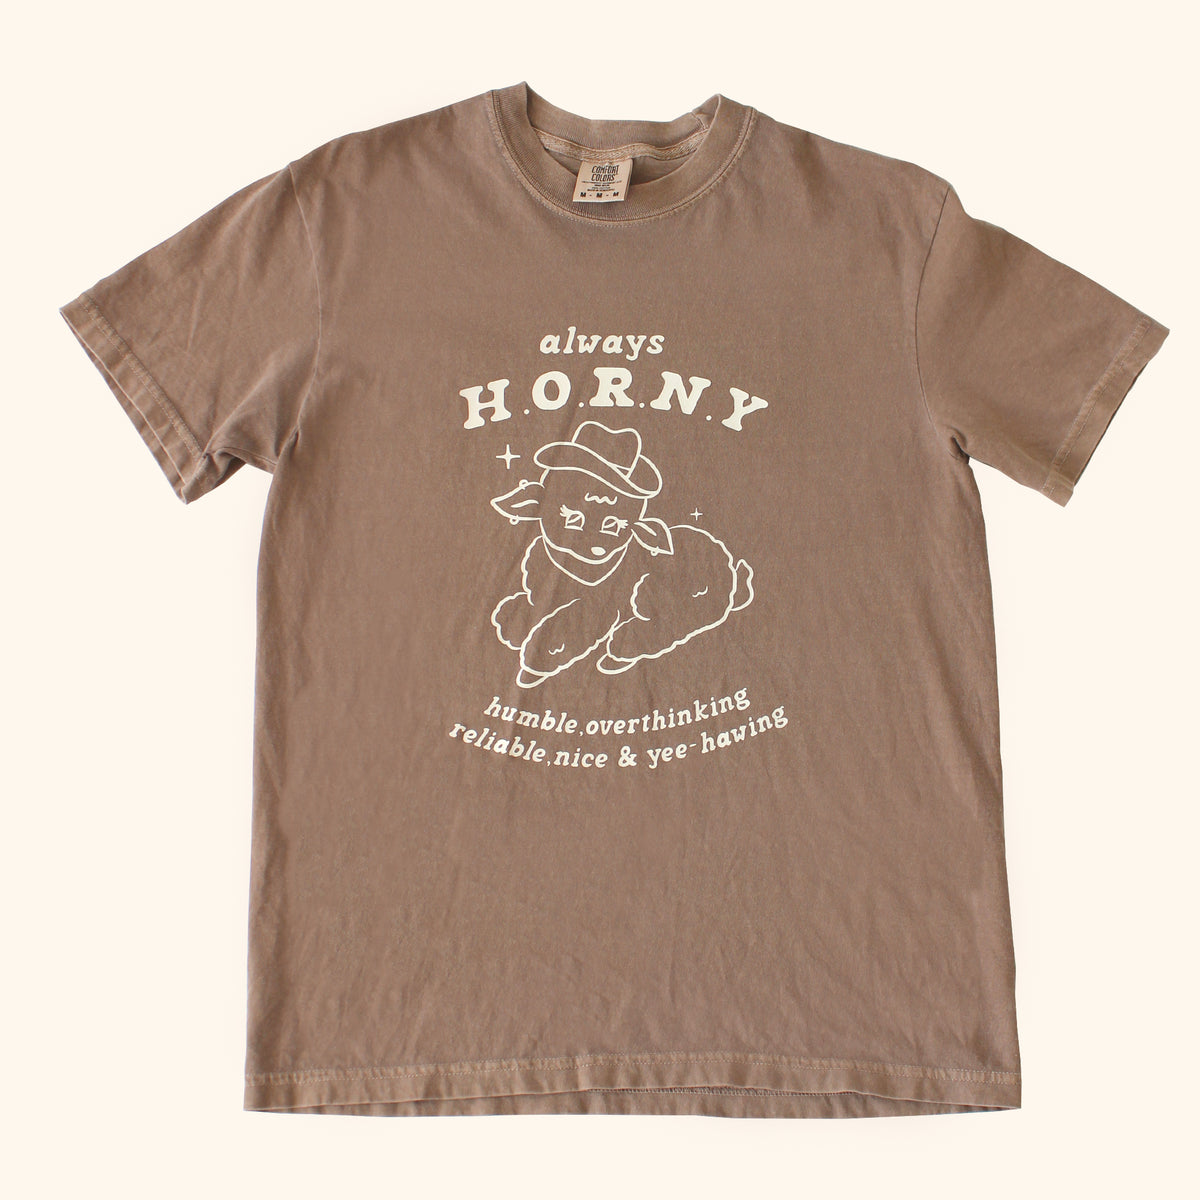 Always H.O.R.N.Y | Brown T-Shirt + Colorful Front Graphic